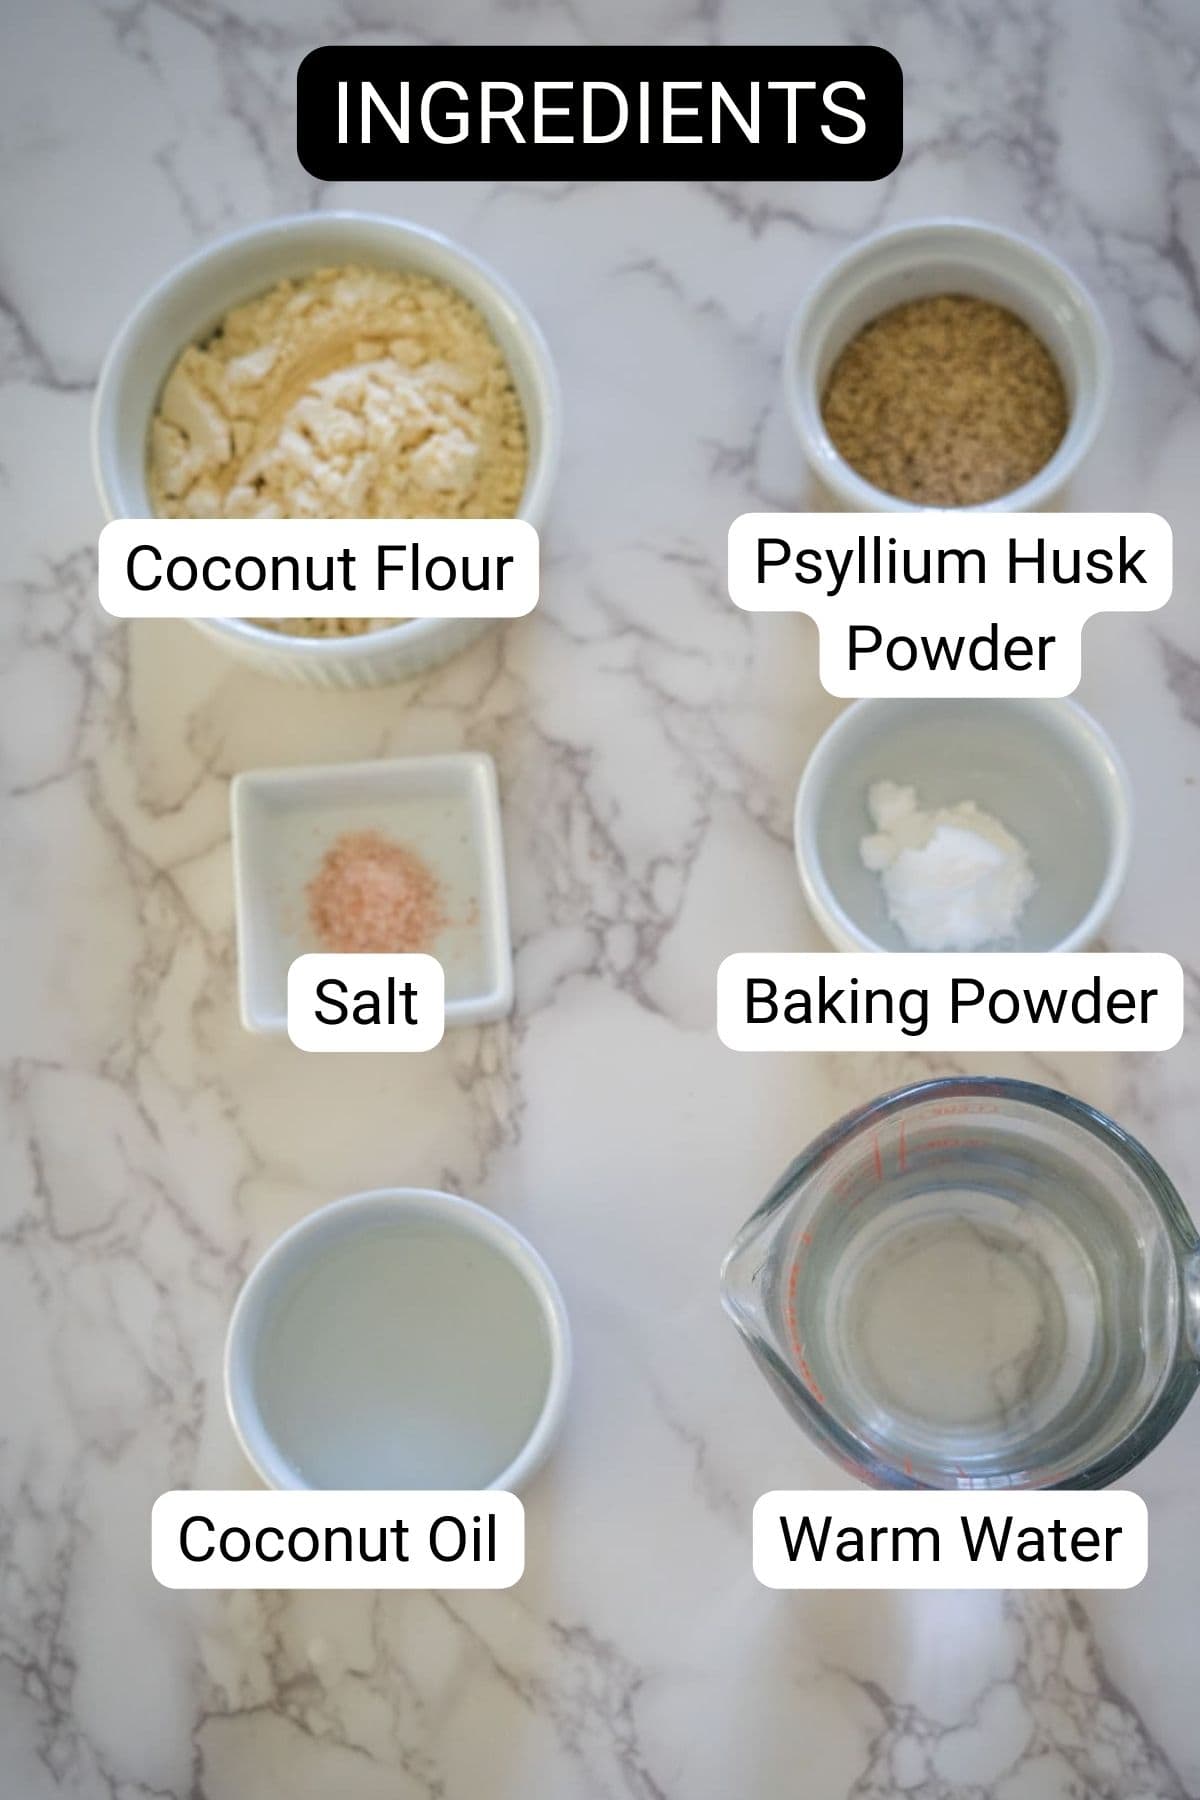 A list of ingredients for a coconut flour flatbread